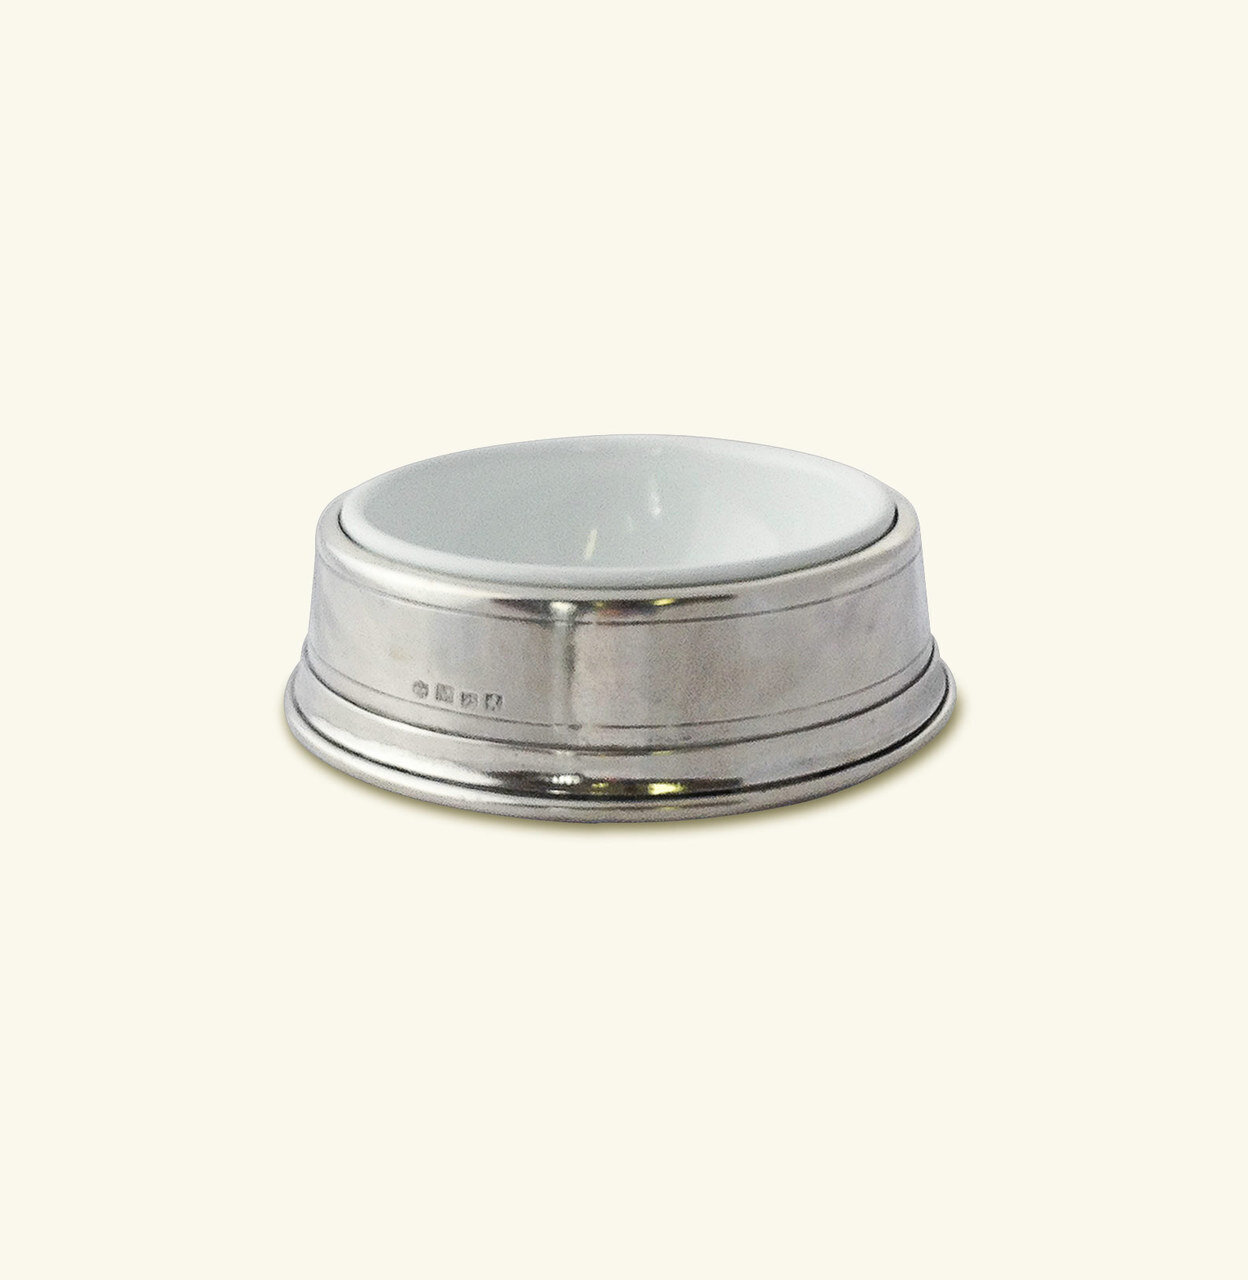 Match Pewter Pet Bowl Small 1344